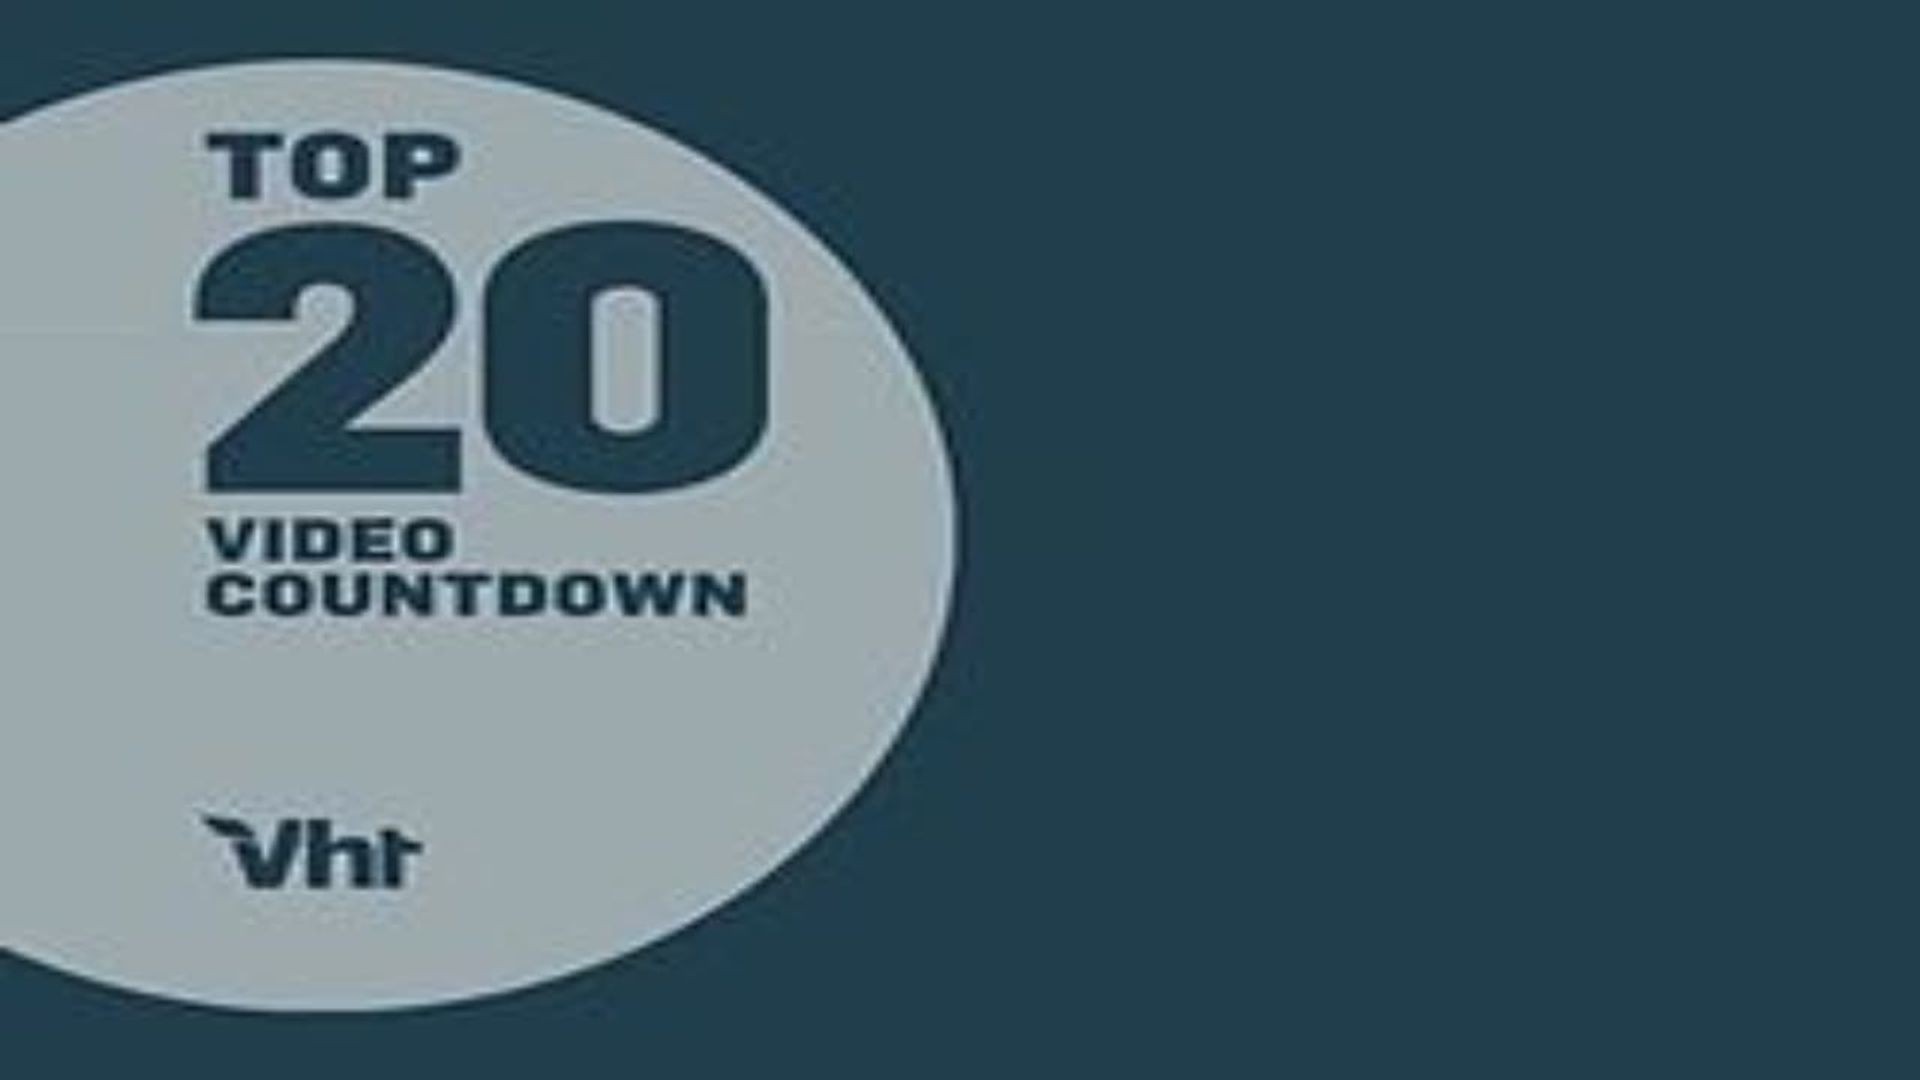 VH1 Top 20 Video Countdown background